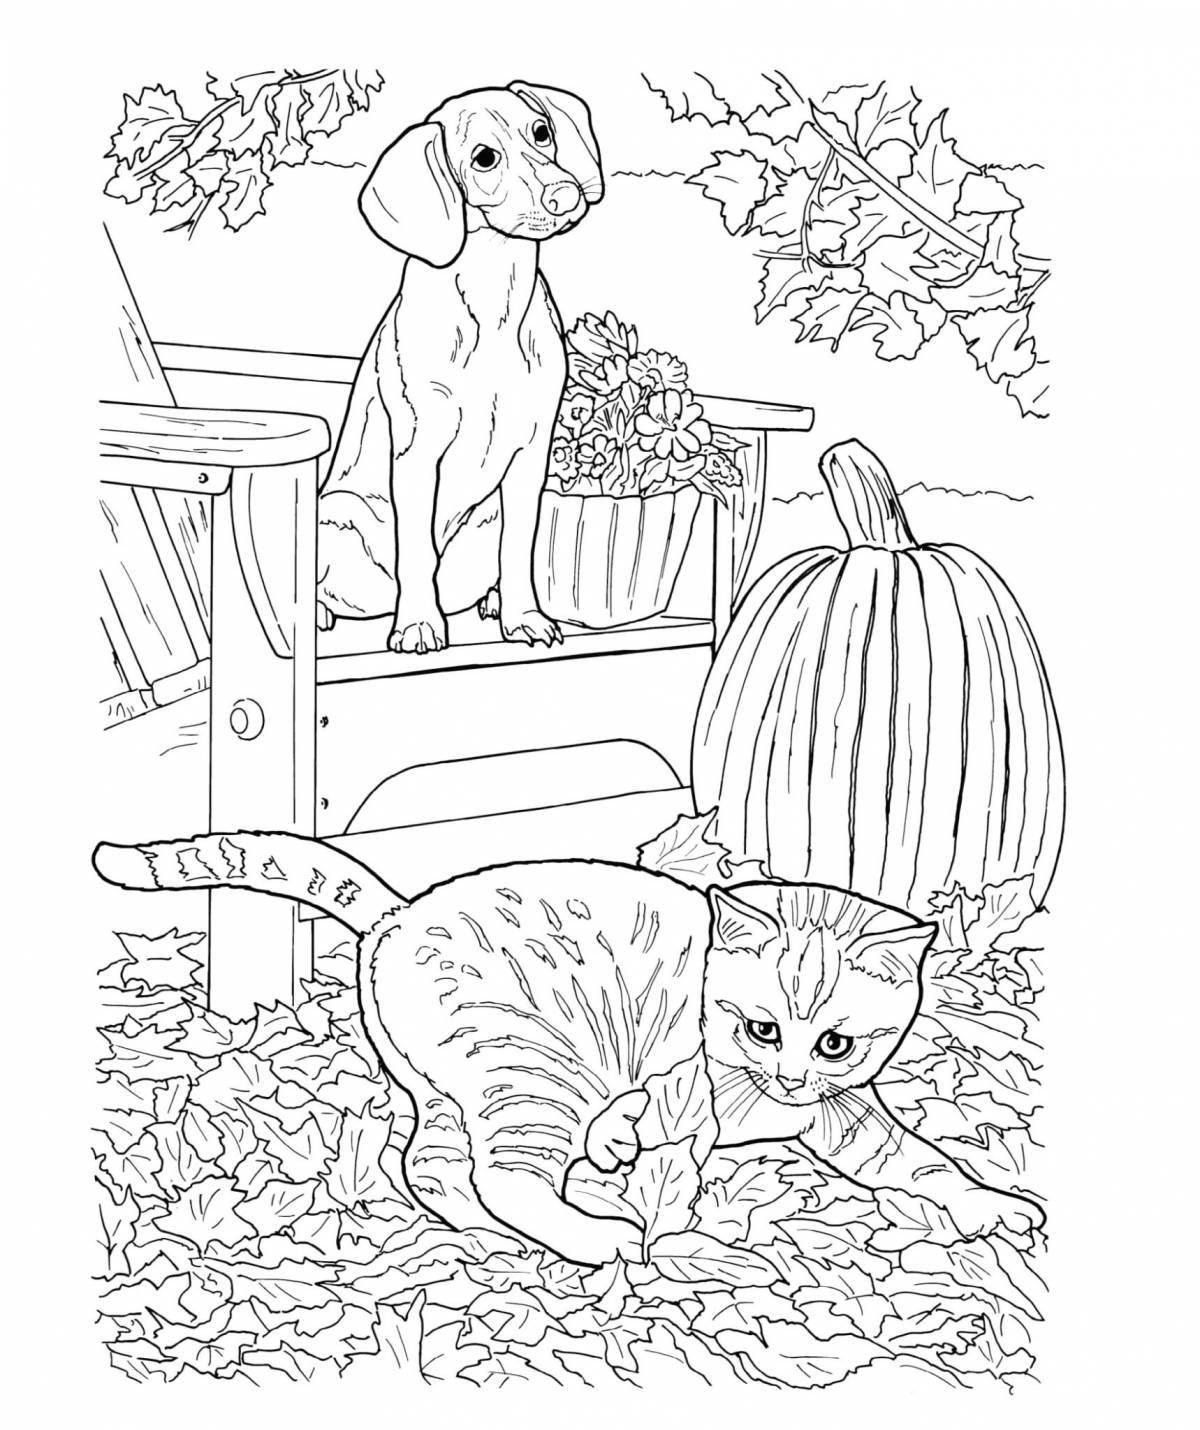 Coloring page funny cat and dog